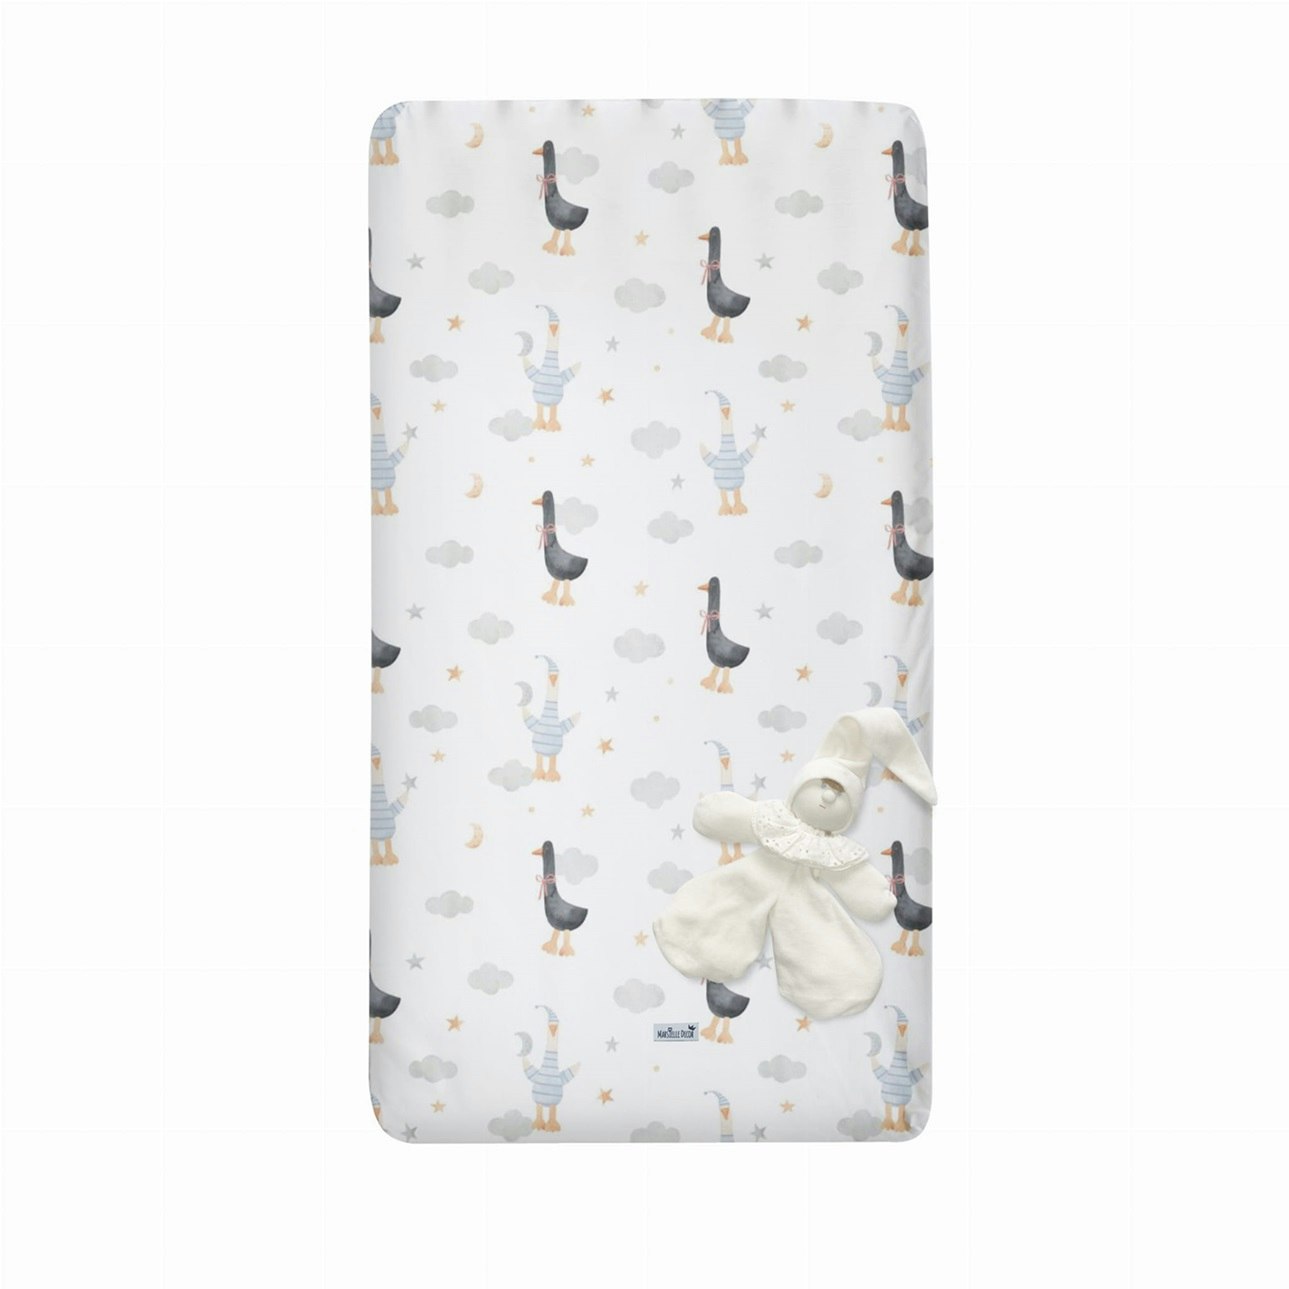 Fitted sheet for junior bed, Ducky 